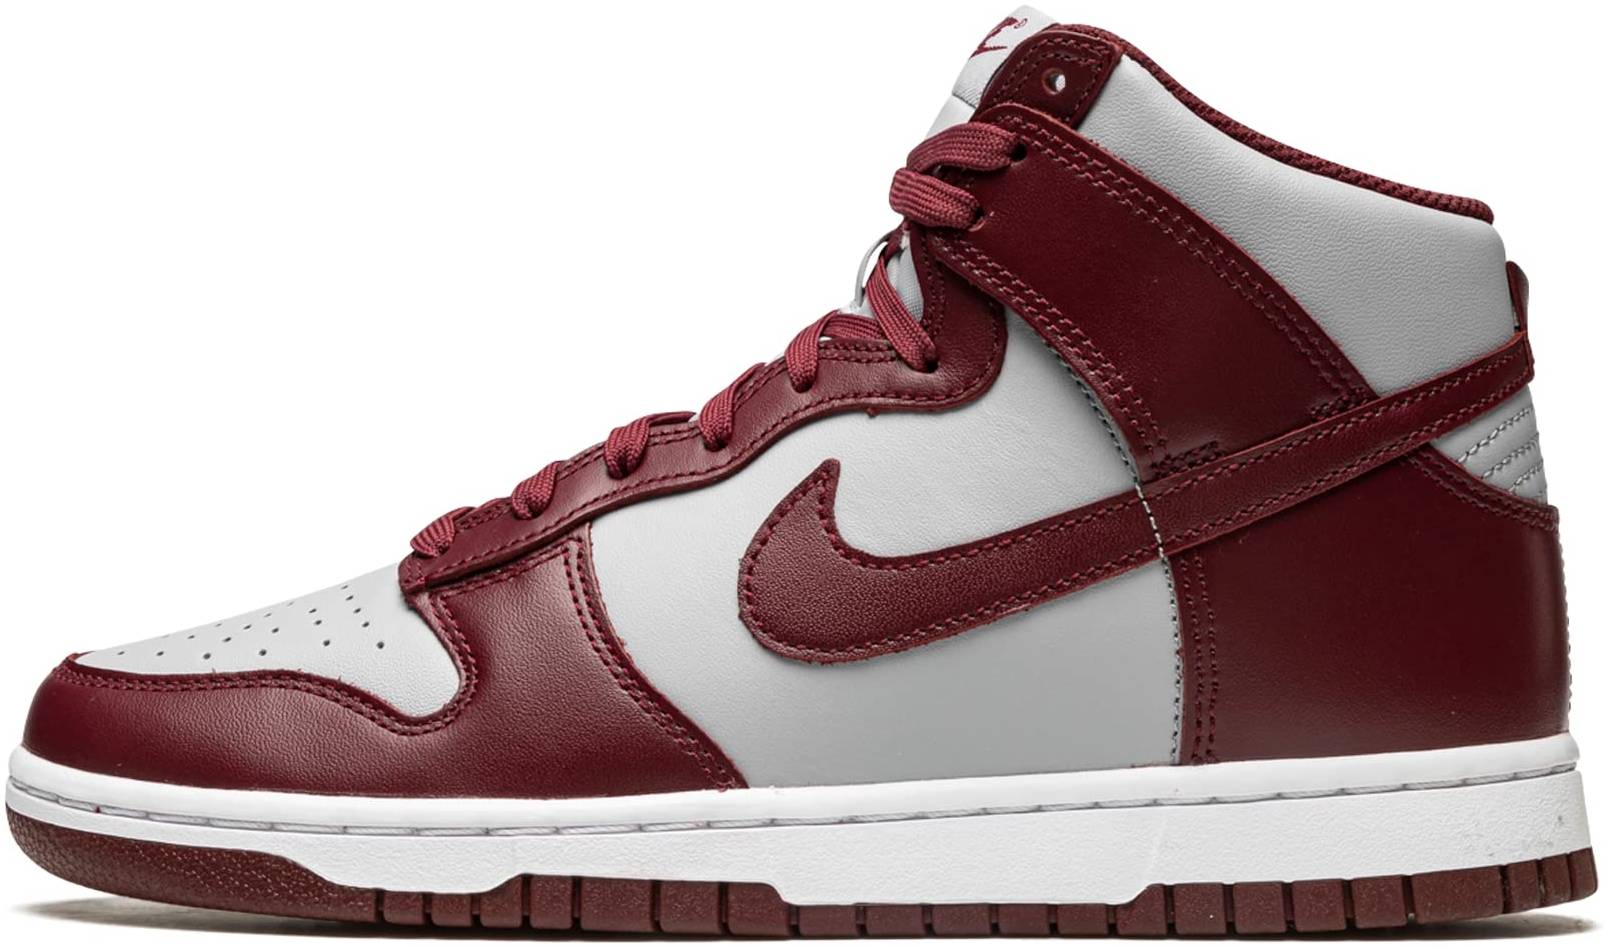 Less than feasible Mobilize Nike Dunk High Retro sneakers in 9 colors | RunRepeat